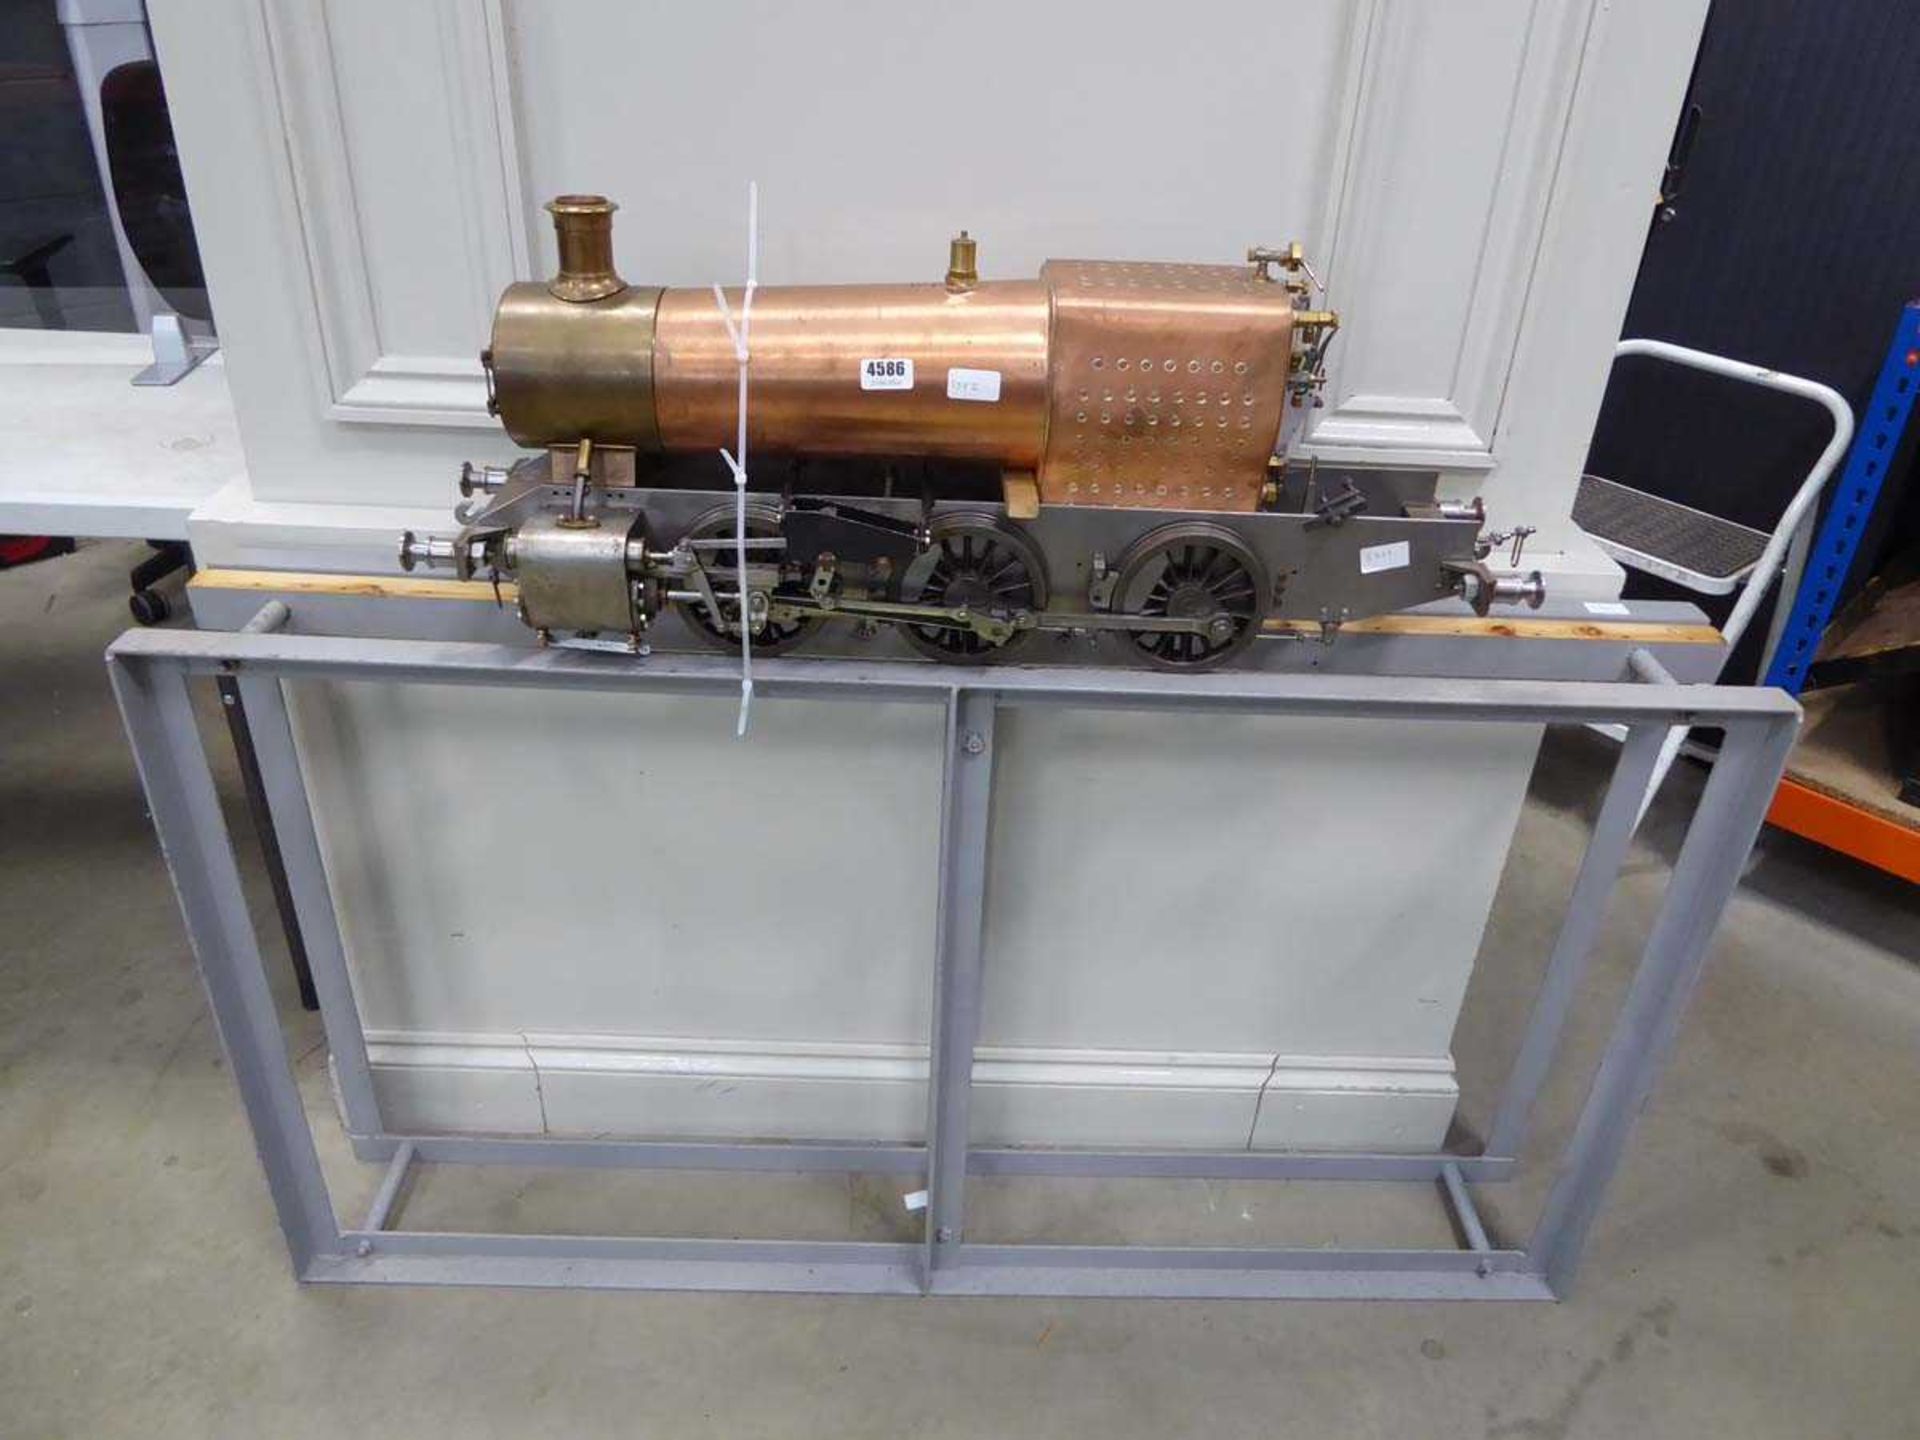 Copper model steam engine with stand